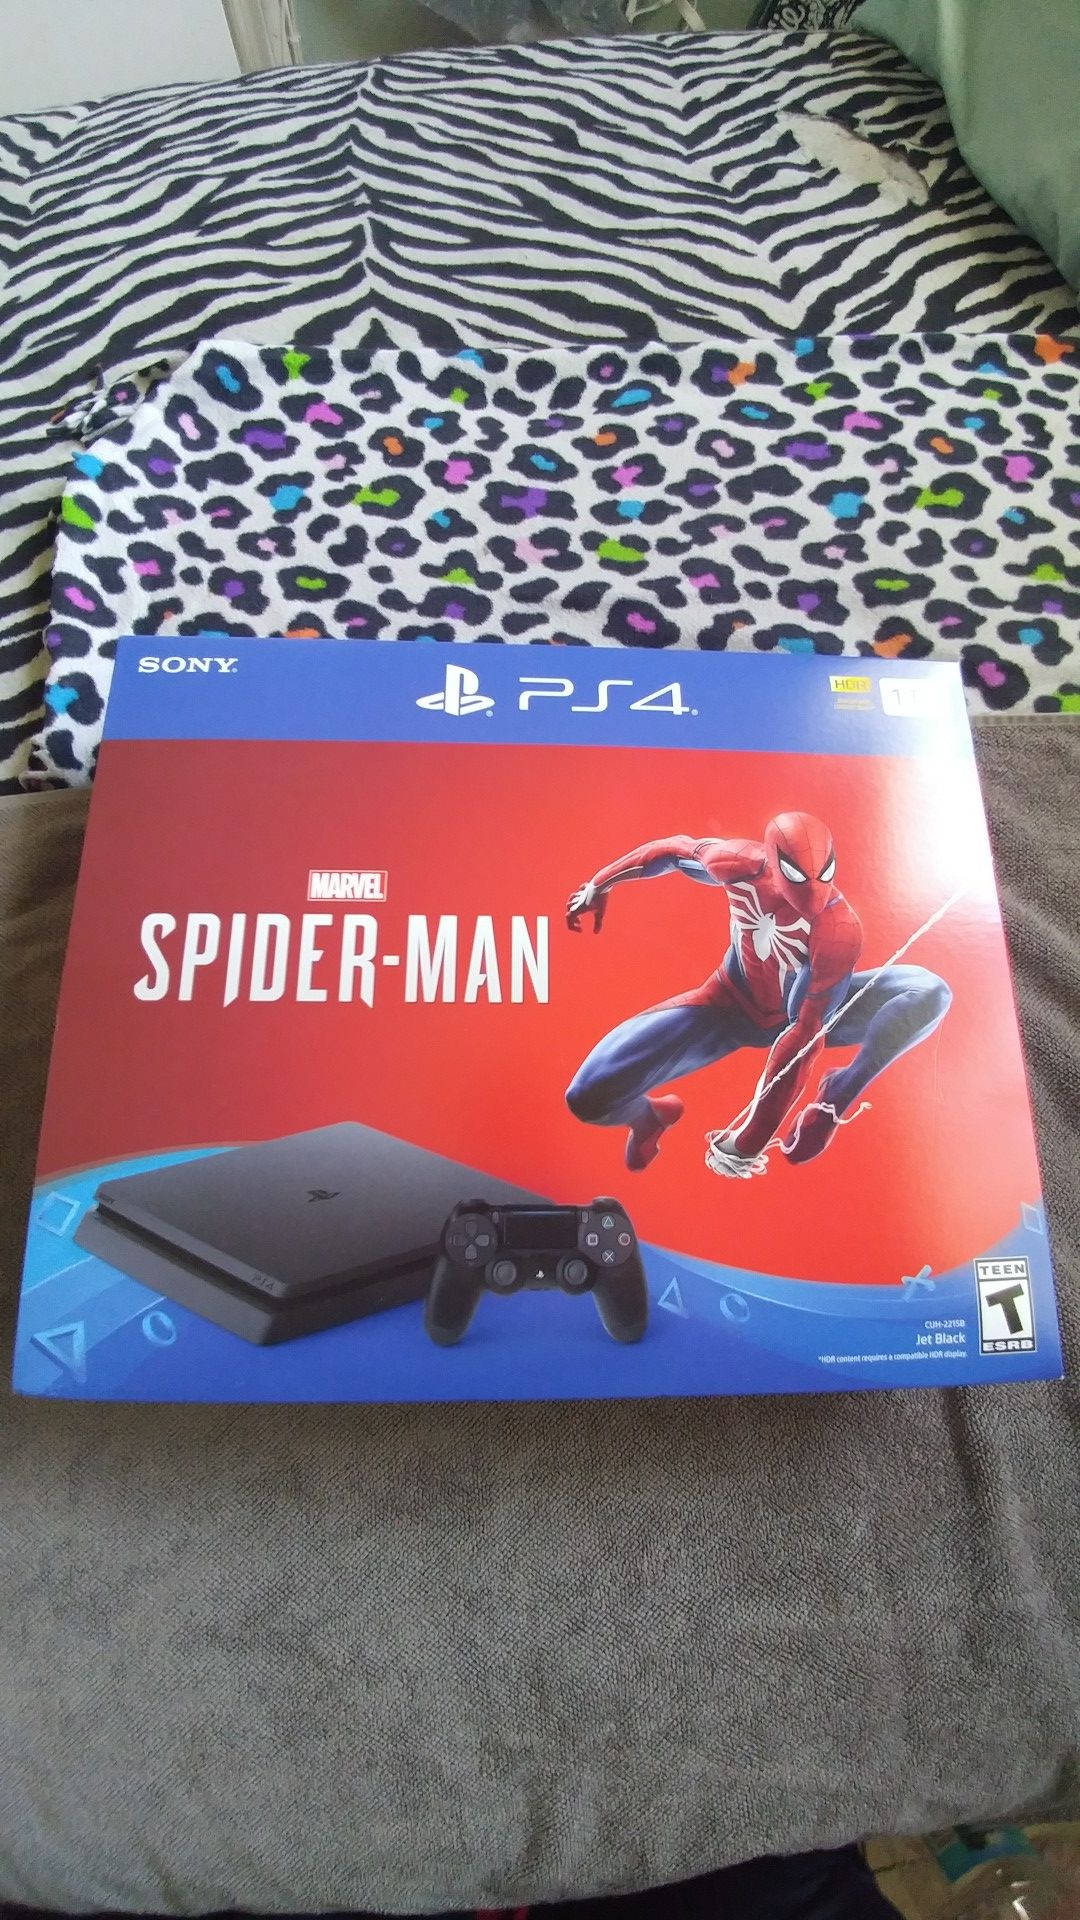 Playstation 4 Spider-Man Edition Bundle With Call of Duty Black Ops 4